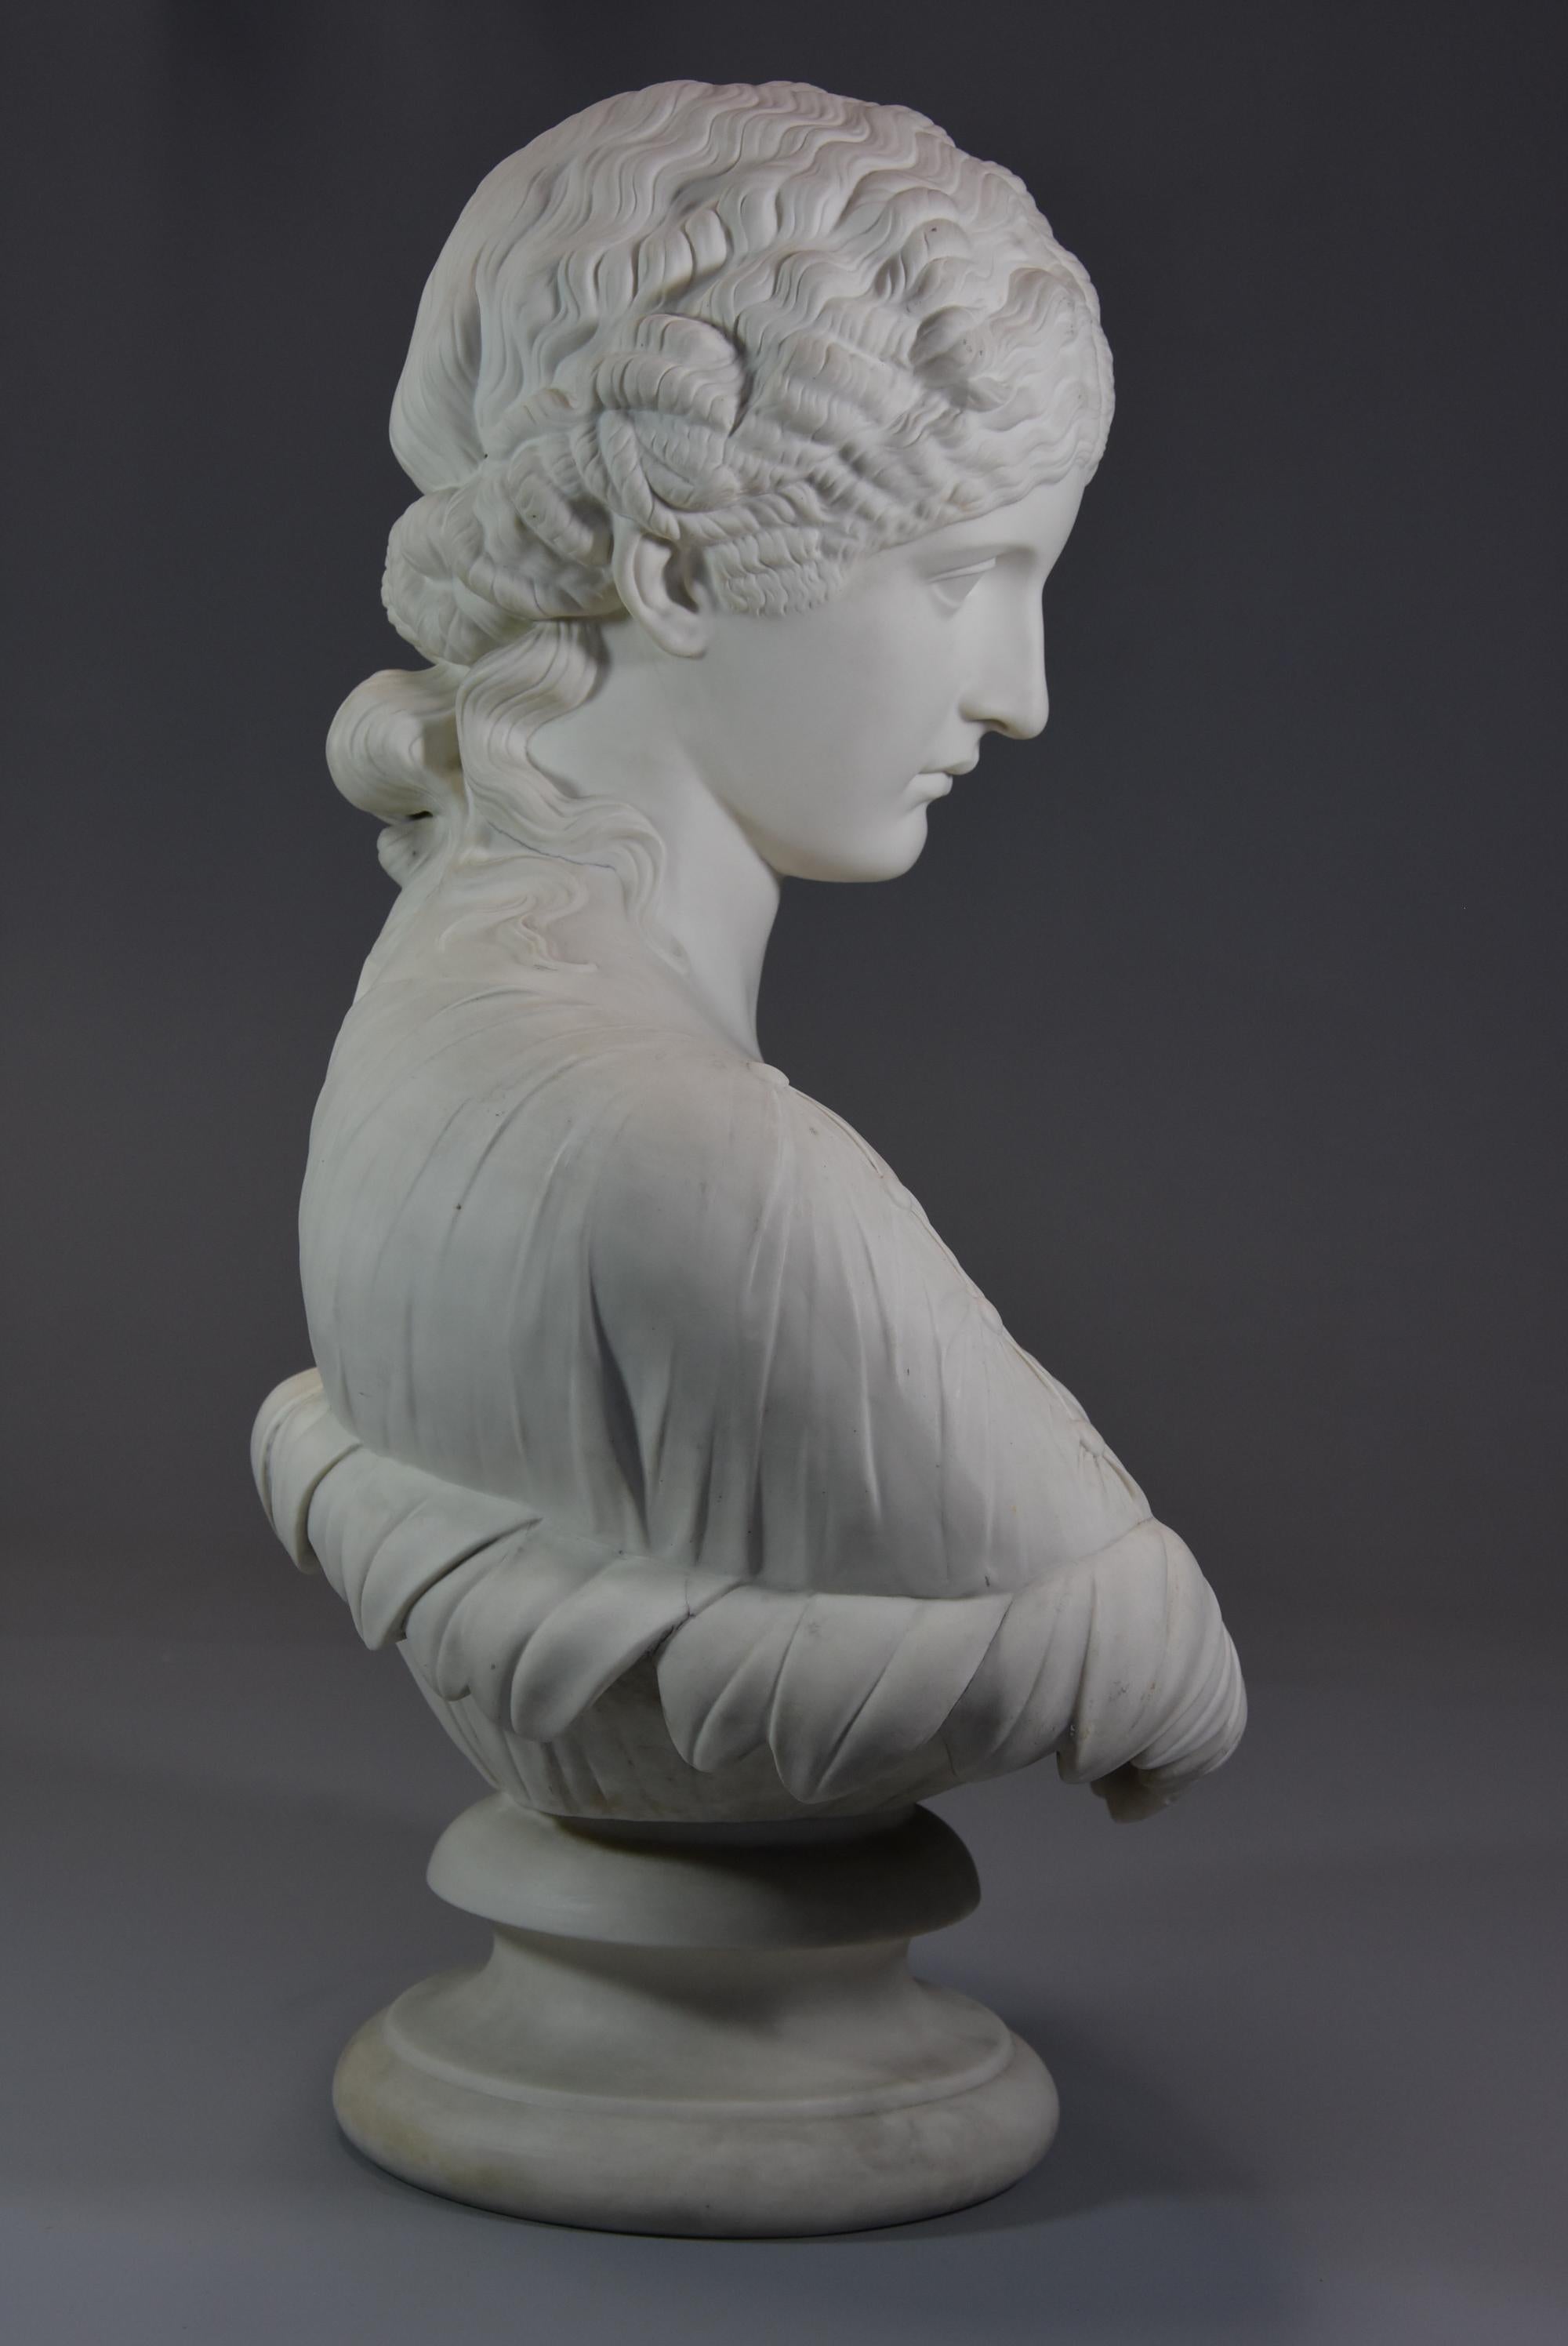 Decorative Large Mid-19th Century Parian Bust of ‘Clytie’, Stamped ‘Copeland' 1